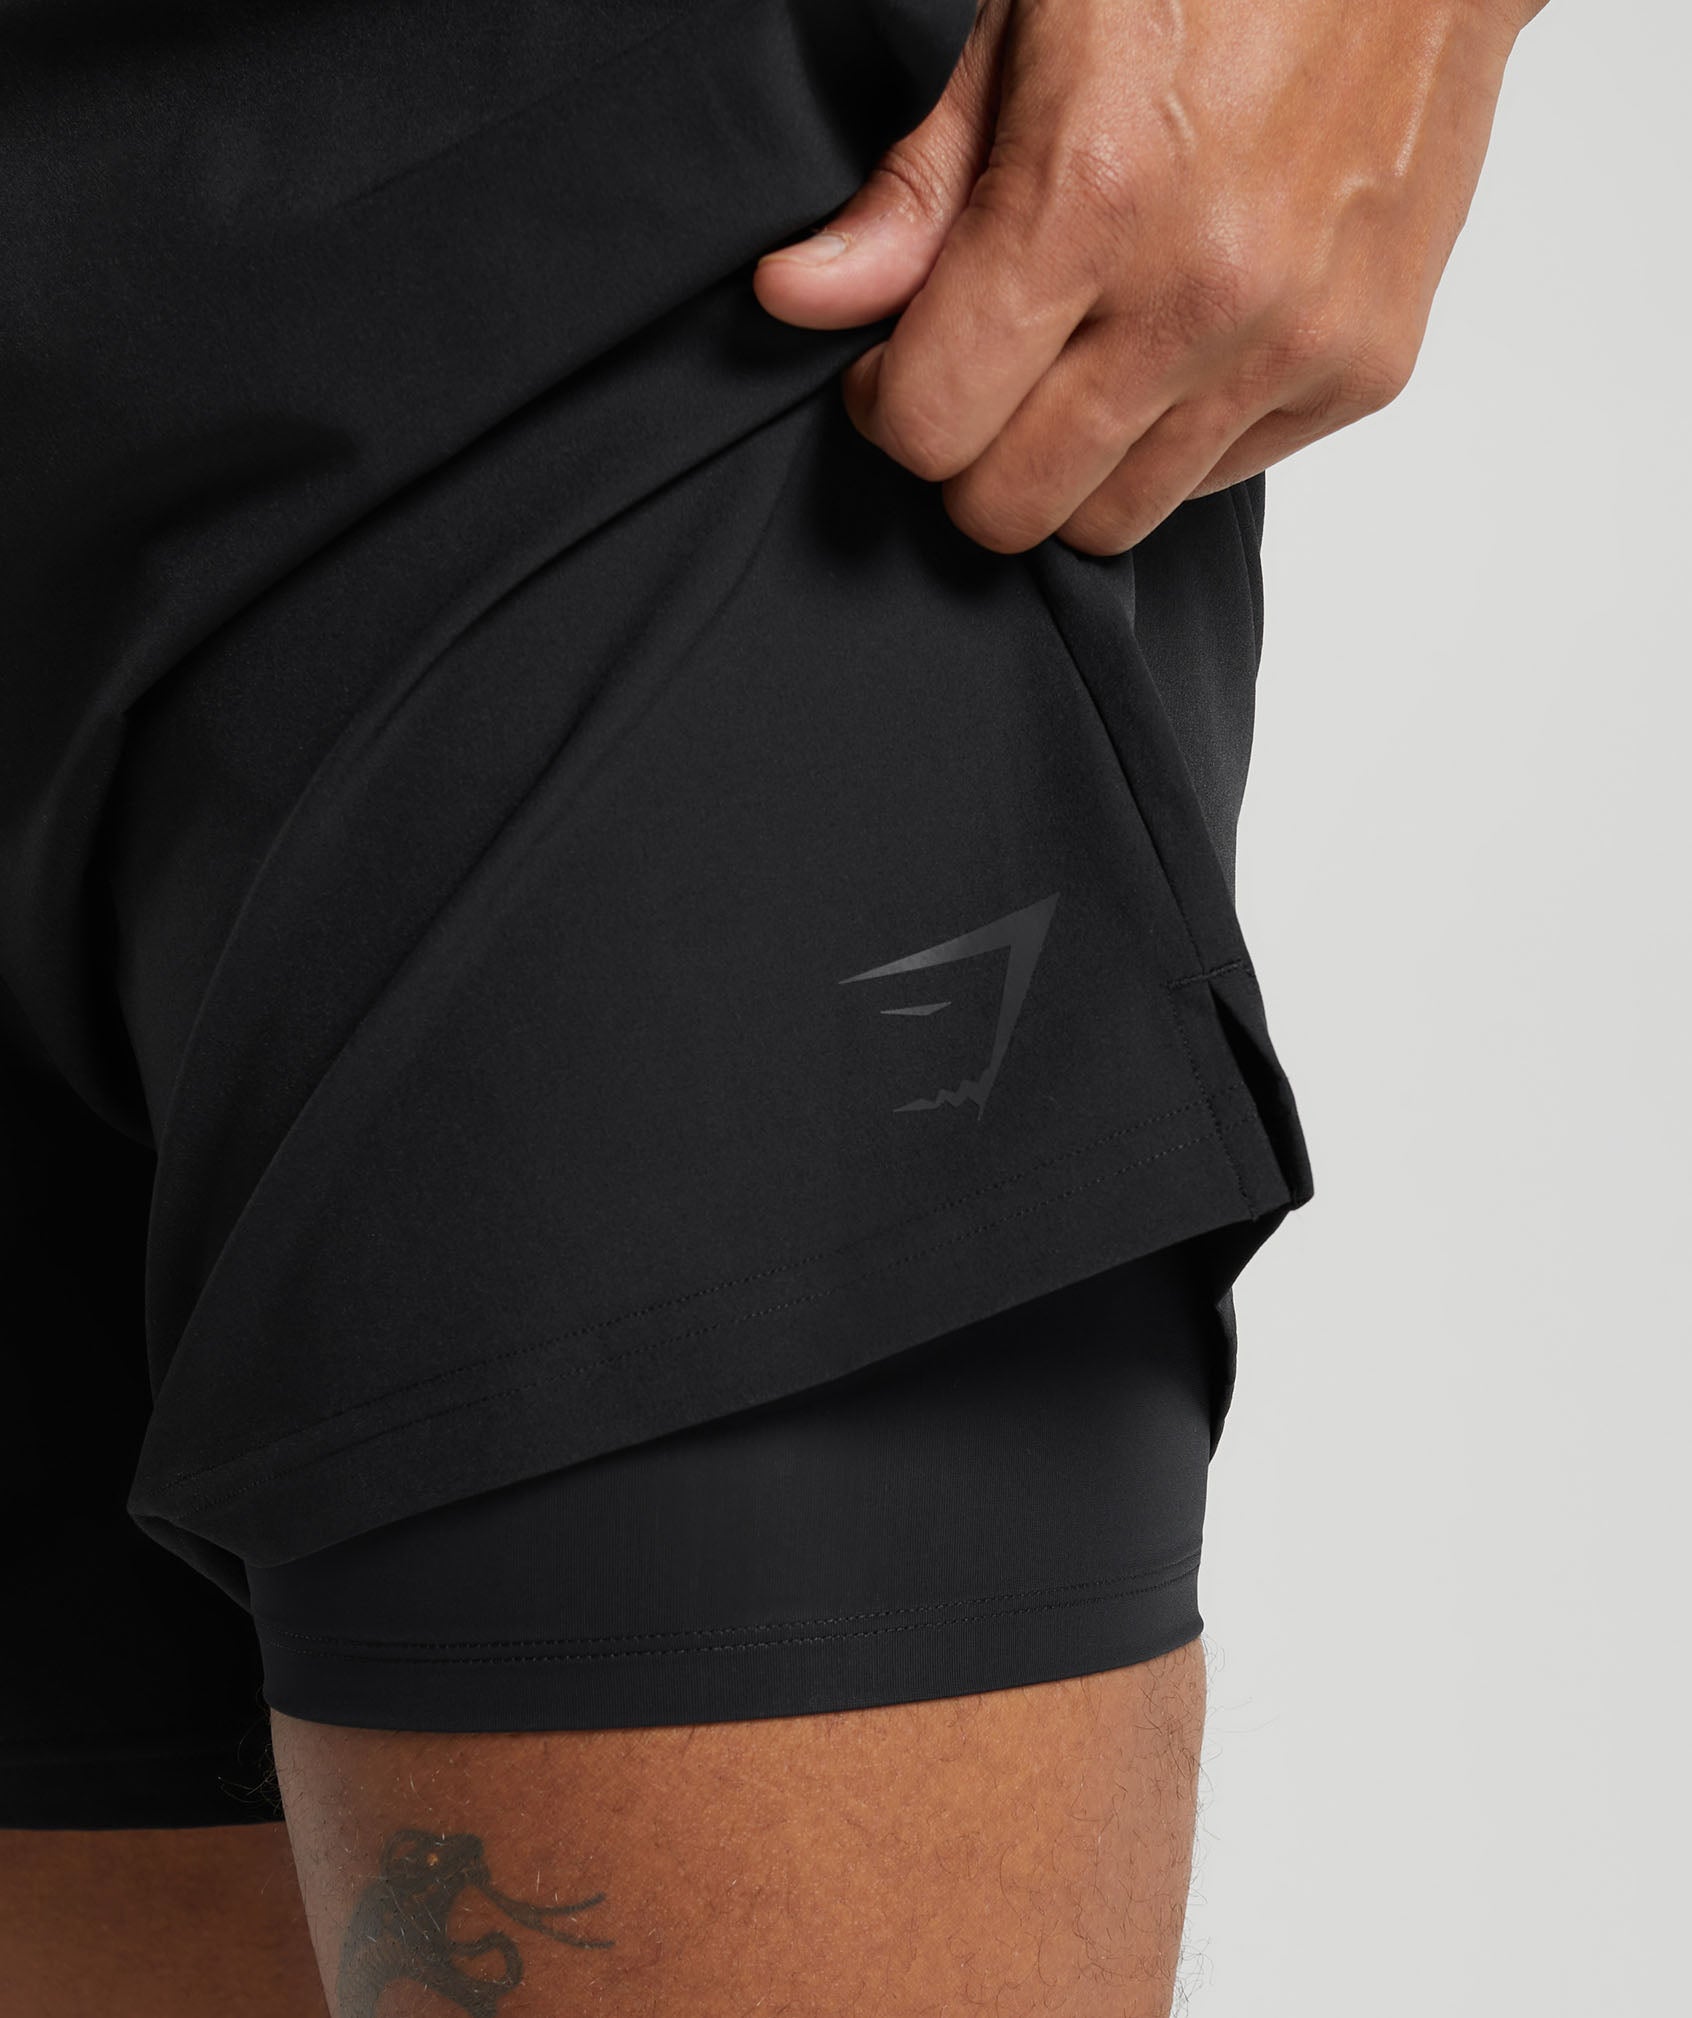 Land to Water 6" Shorts in Black - view 6